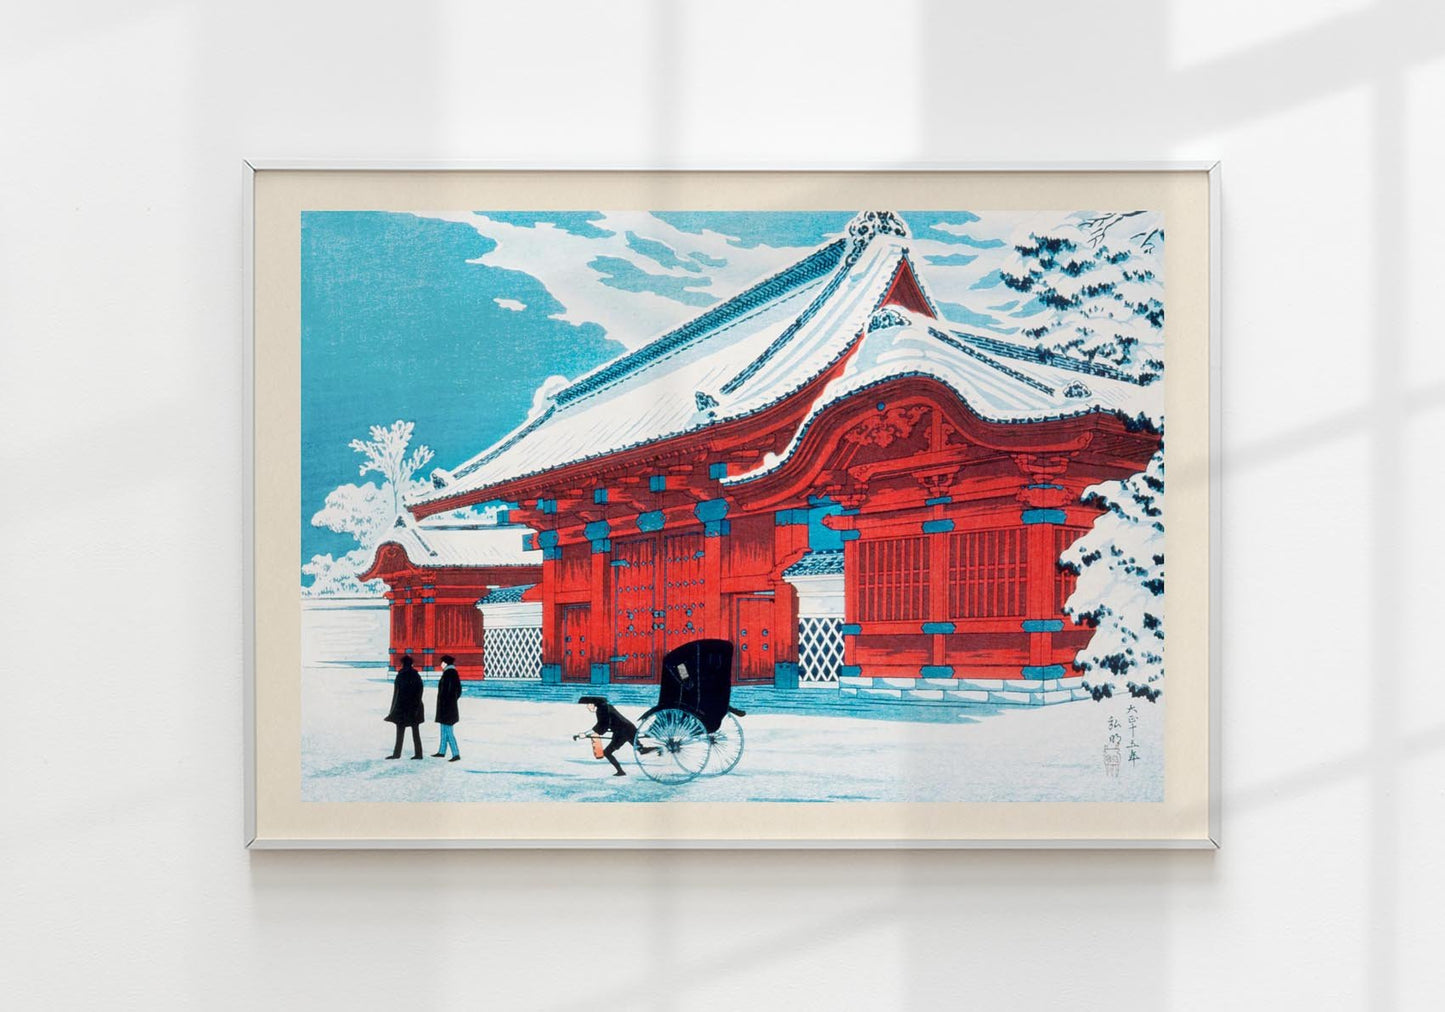 Red Gate of Hongo in Snow by Takahashi Shōtei